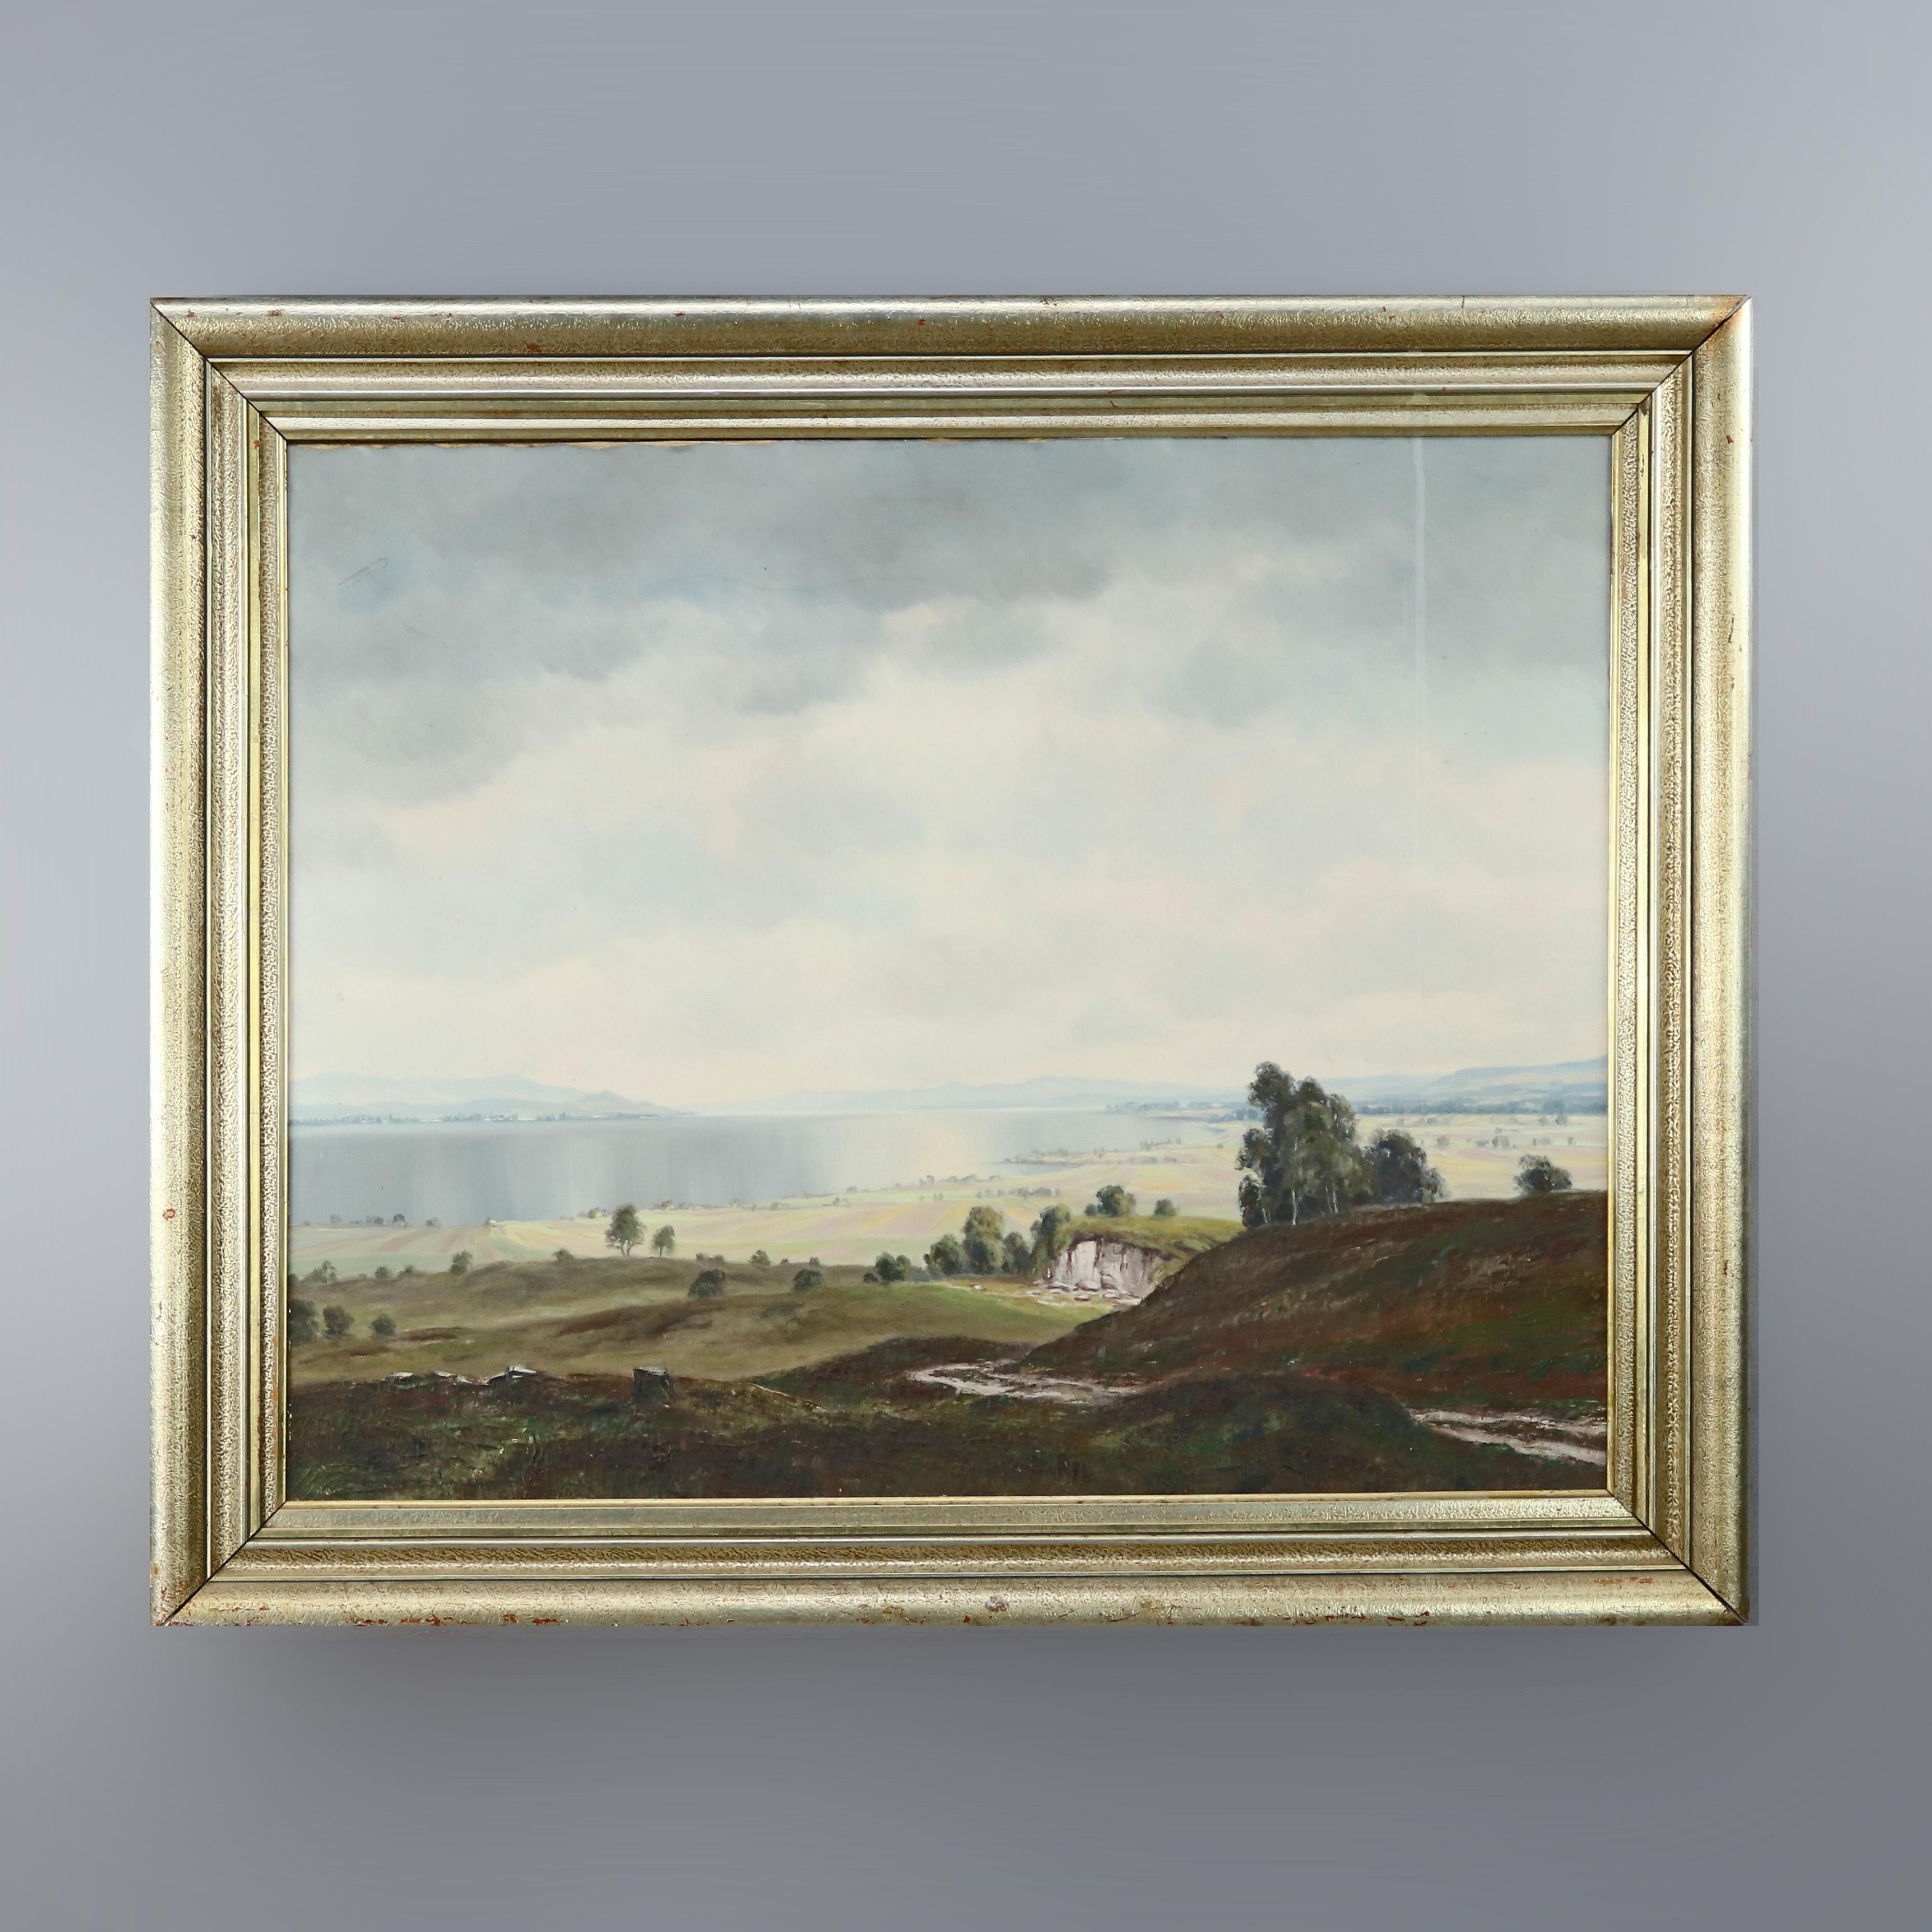 20th Century Painting, Landscape Oil on Canvas, Manner of Hudson River School, circa 1930